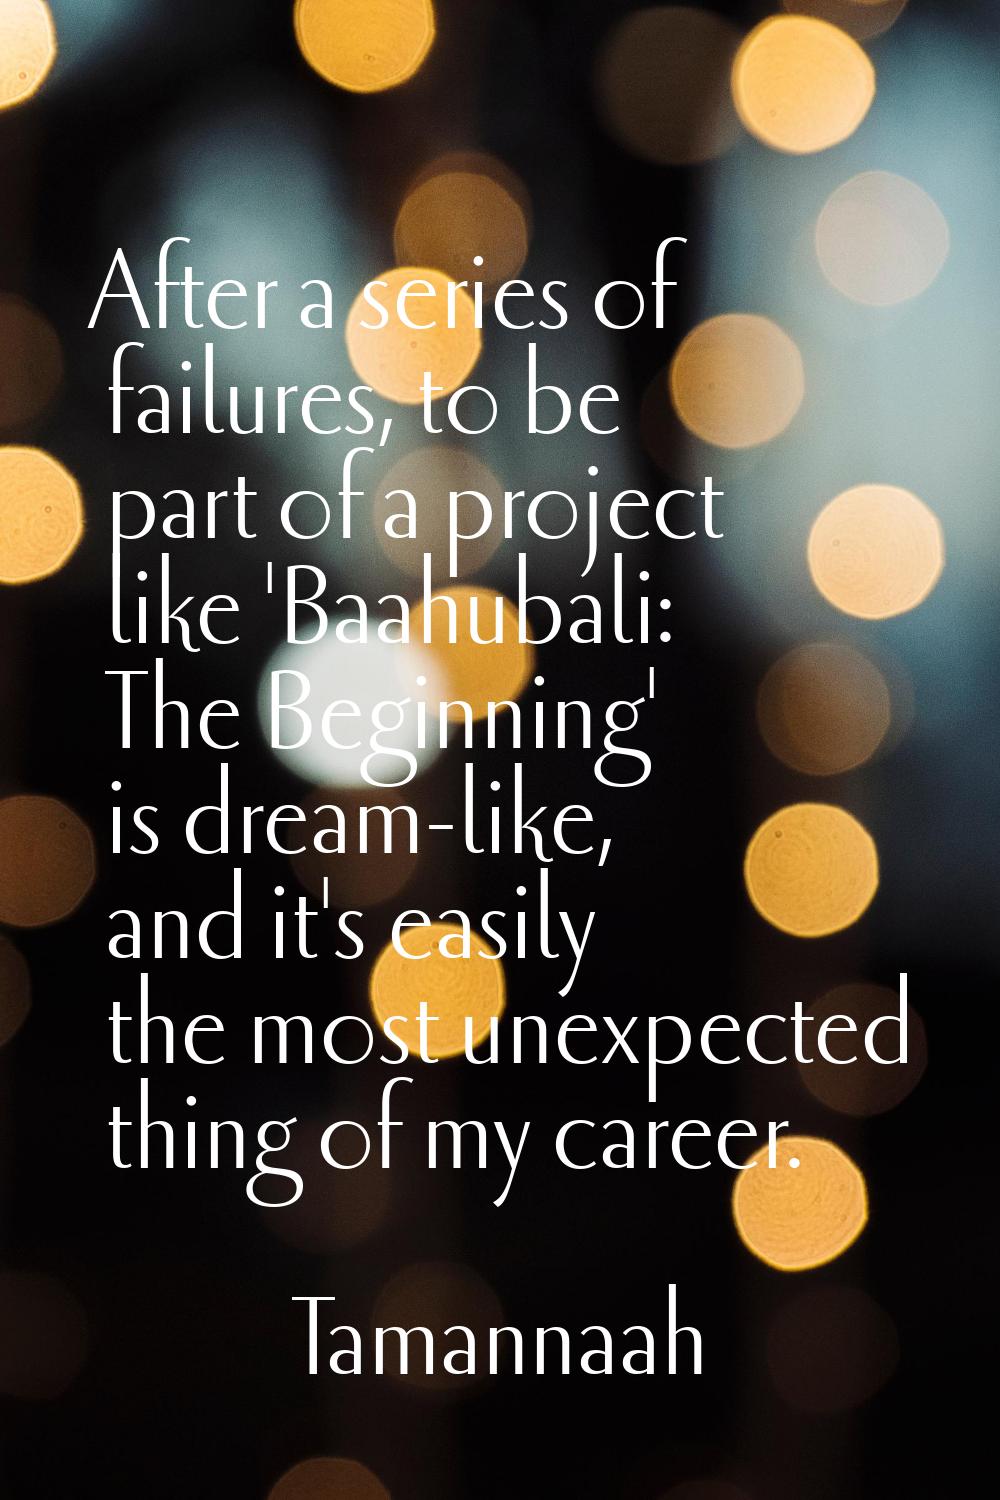 After a series of failures, to be part of a project like 'Baahubali: The Beginning' is dream-like, 